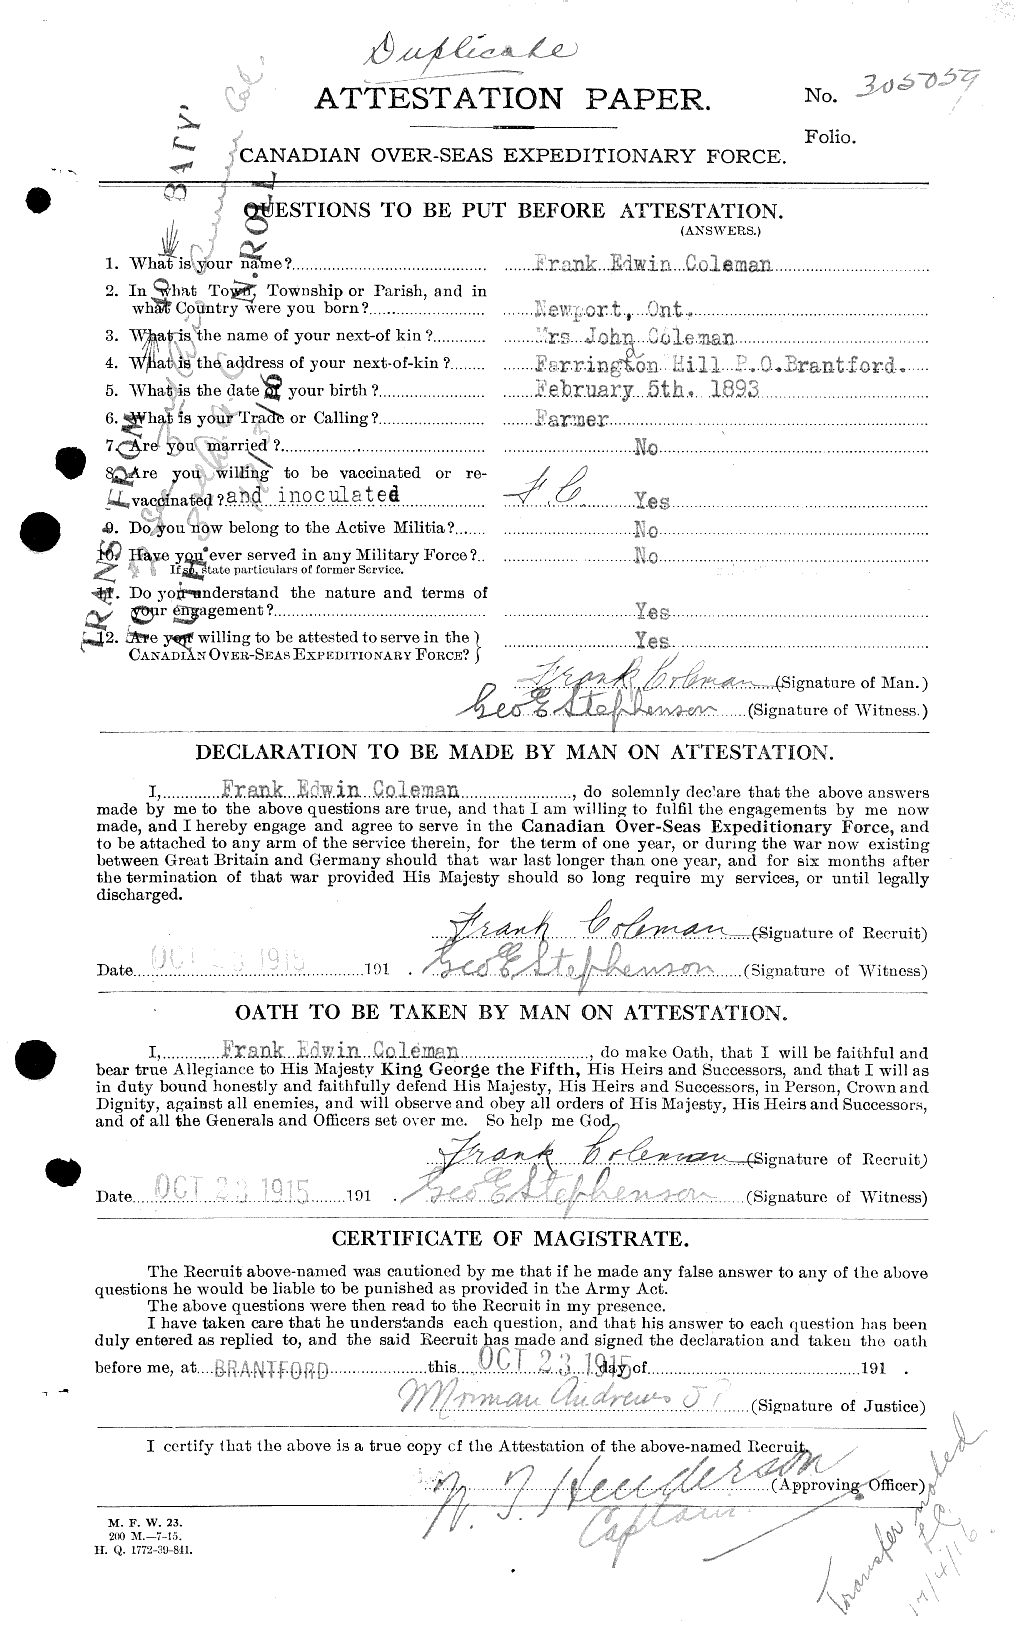 Personnel Records of the First World War - CEF 028129a